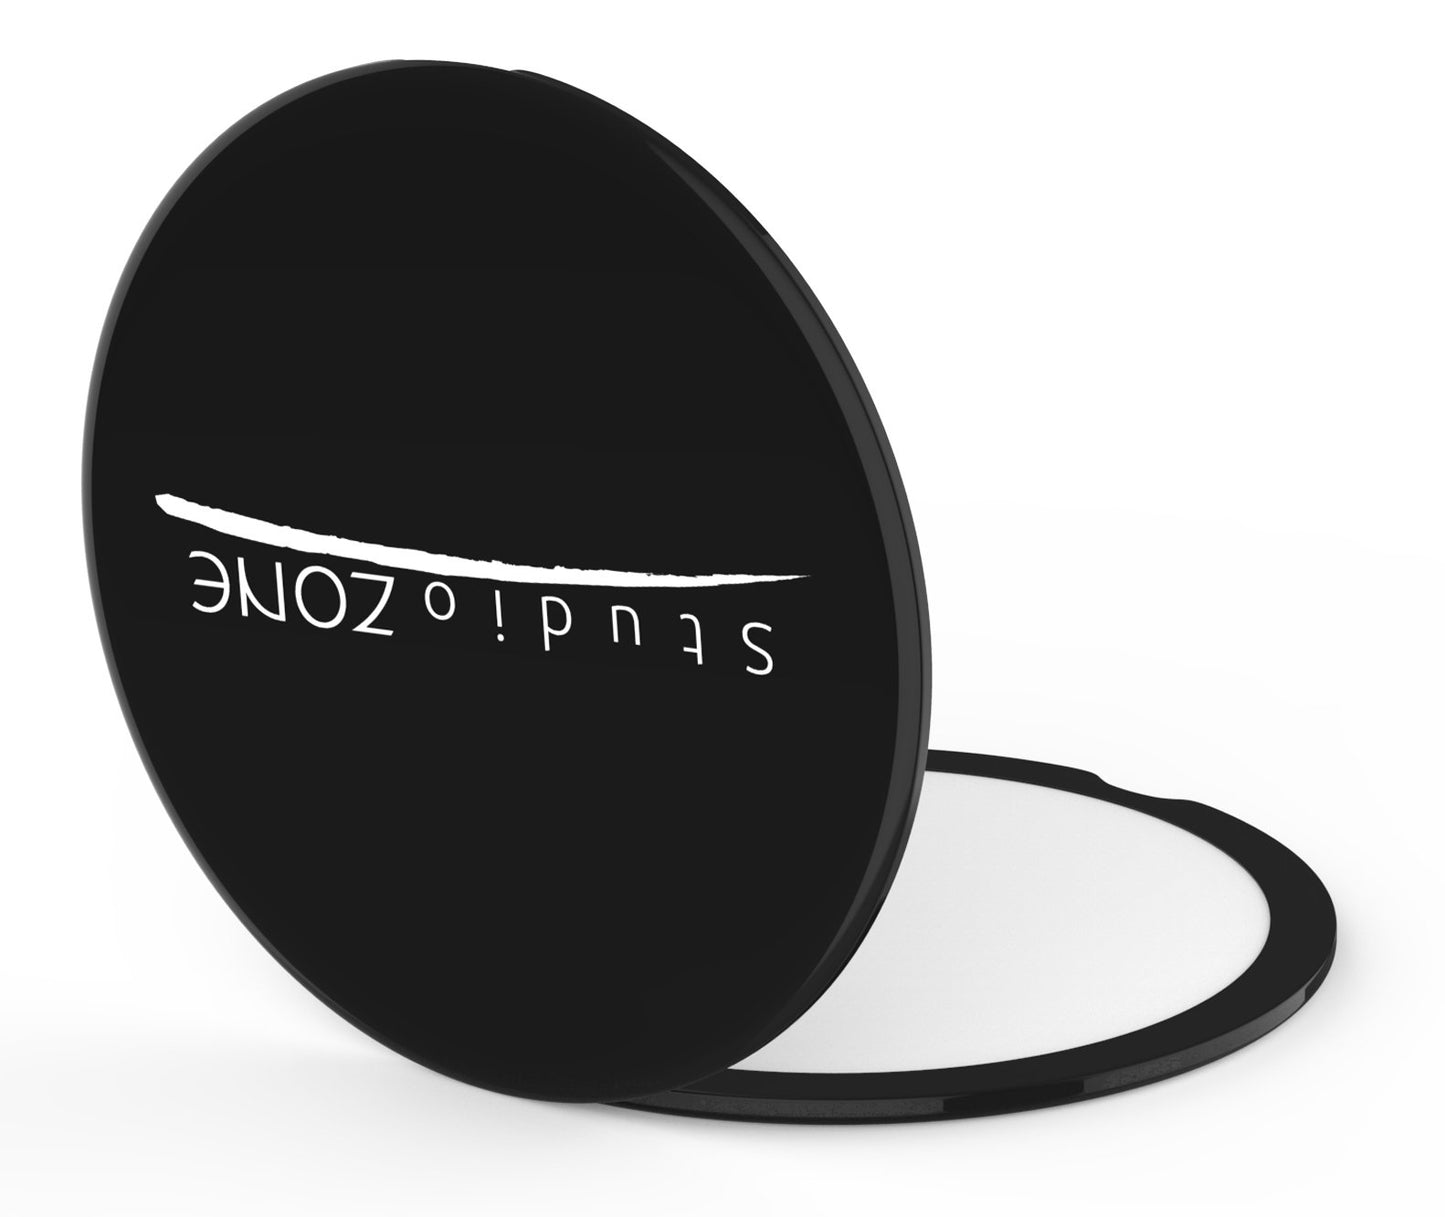 StudioZONE Best Compact Mirror - 10X Magnifying Makeup Mirror - Perfect for Purses - Travel - 2-Sided with 10X Magnifying Mirror and 1x Mirror - ClassZ Compact Mirror - 4 Inch Diameter